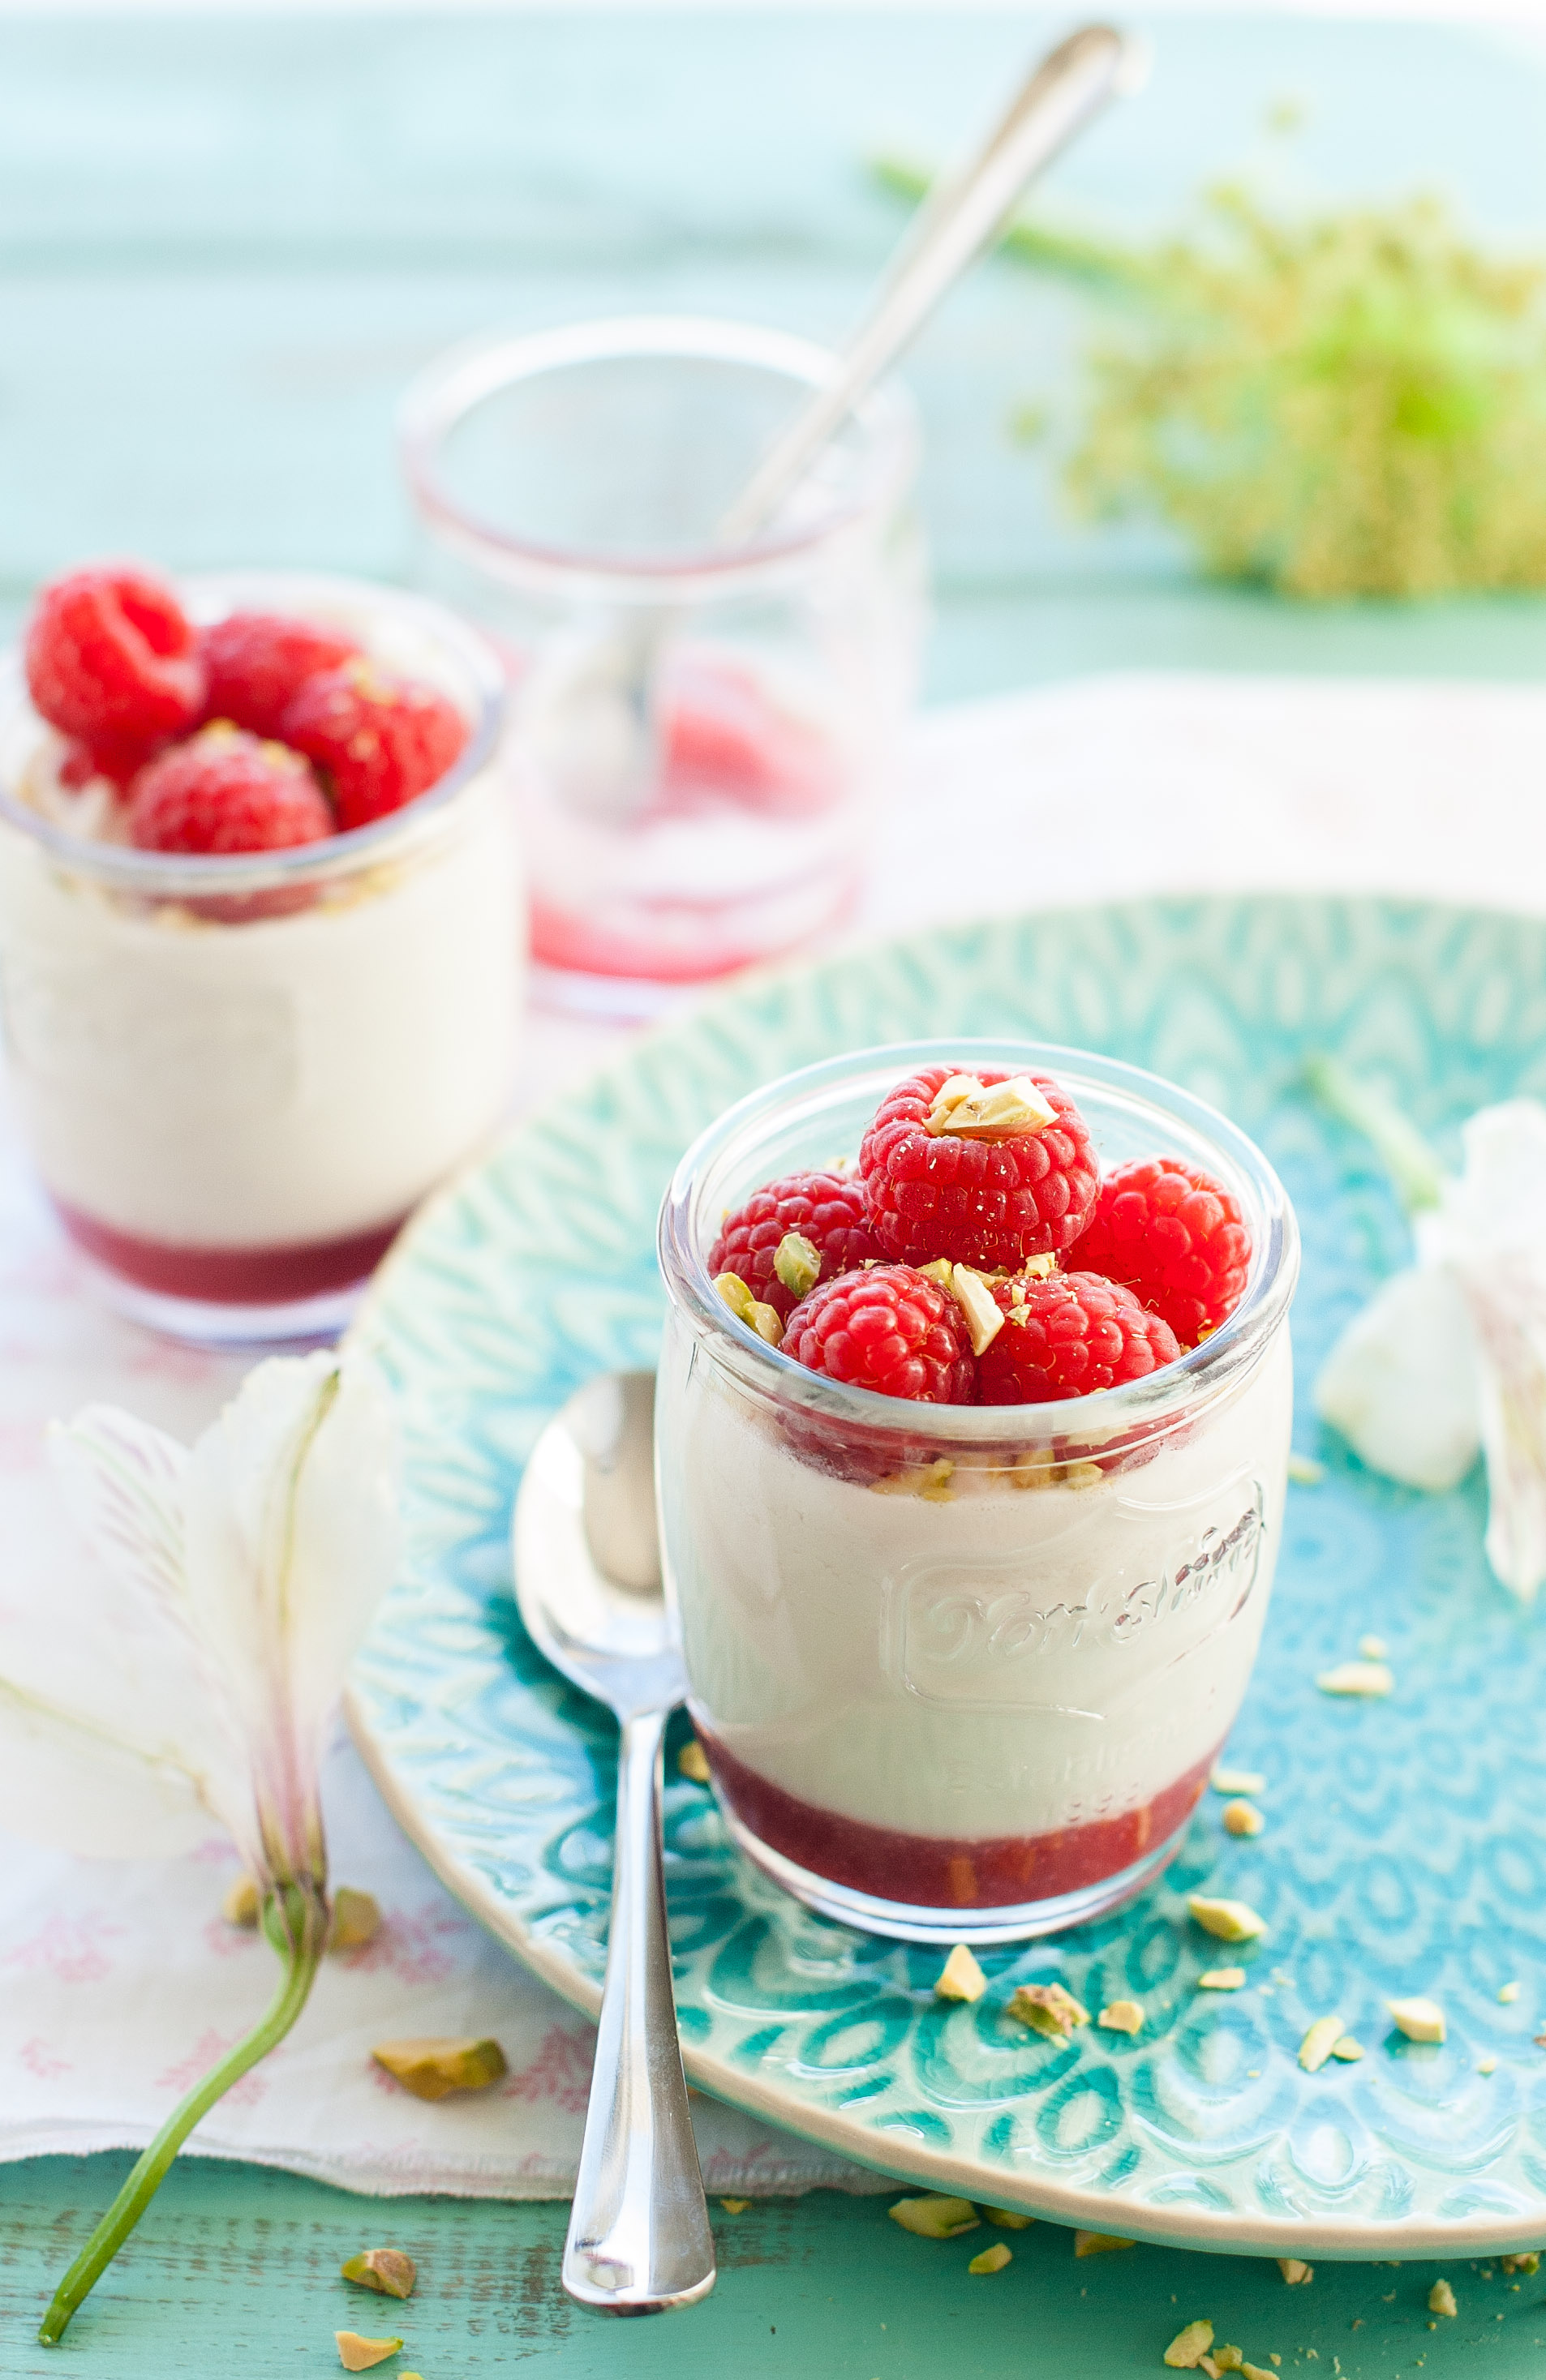 Tuscany In a nutshell Panna Cotta ( Cooked Cream )